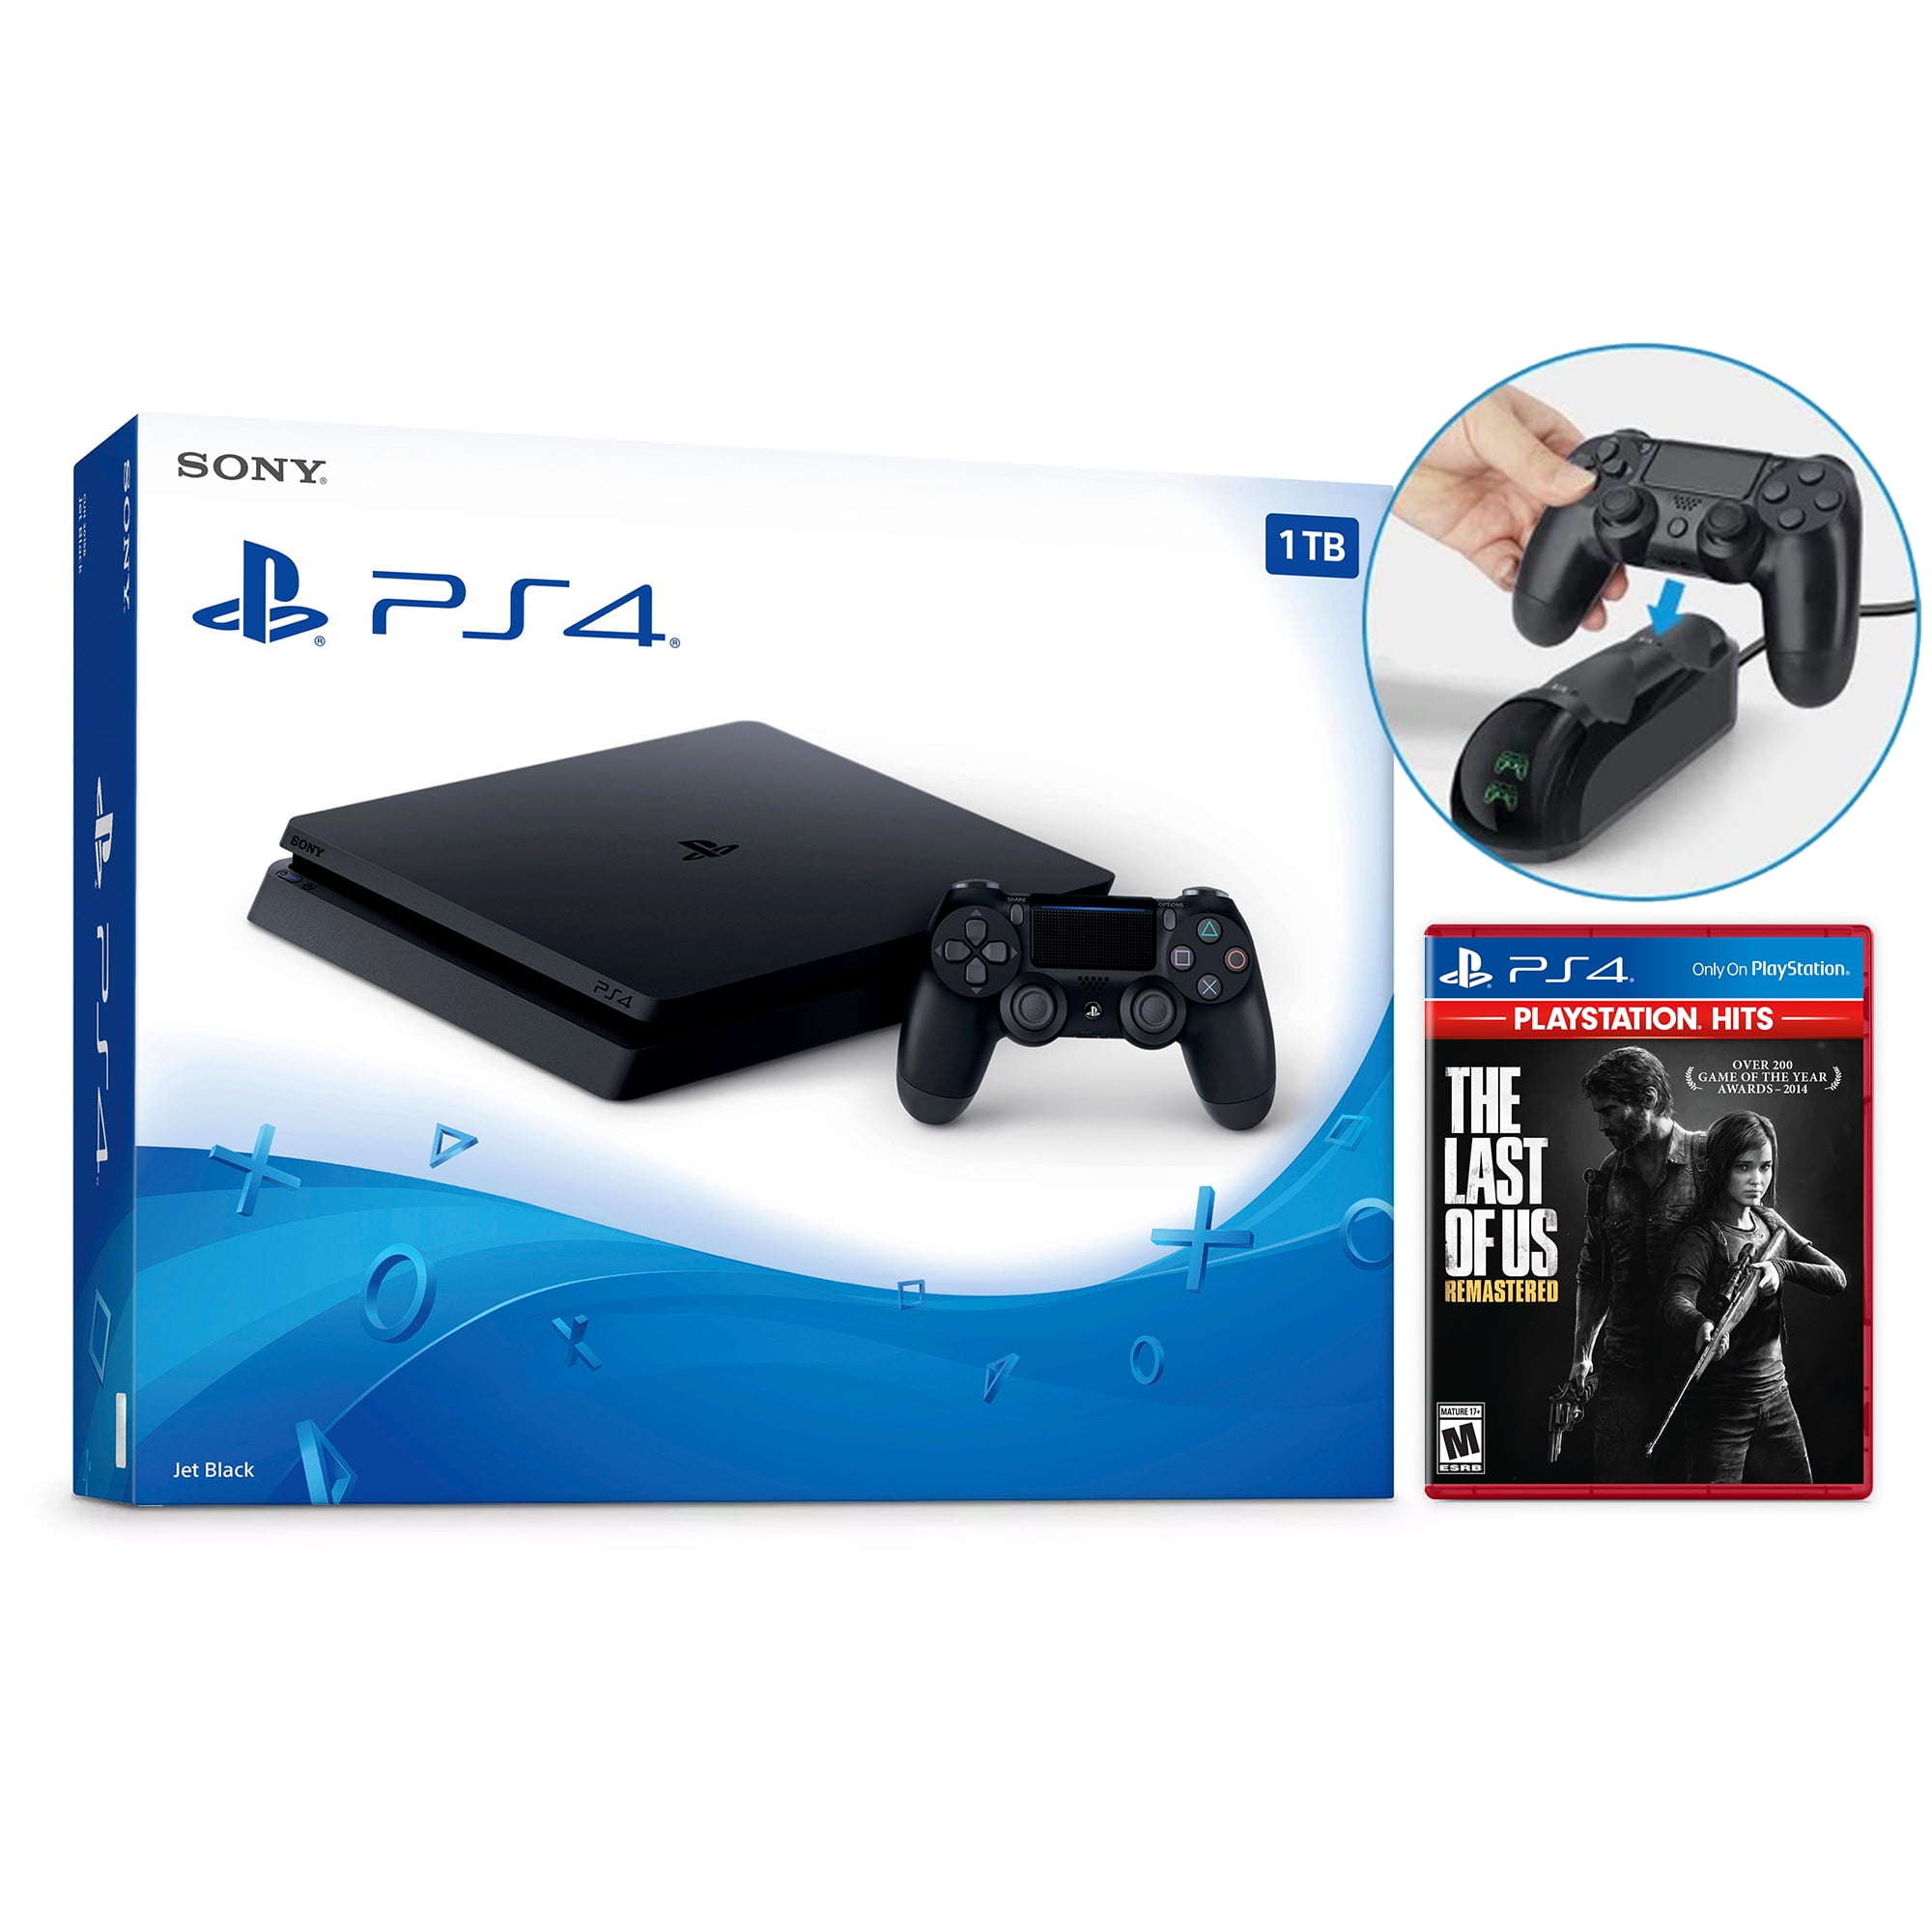 Sony PlayStation 4 Slim The Last of Us: Remastered Bundle Upgrade 1TB SSD PS4 Gaming Console, Black, with Controller Charger - Internal Fast Solid State Drive Enhanced PS4 Console - Walmart.com